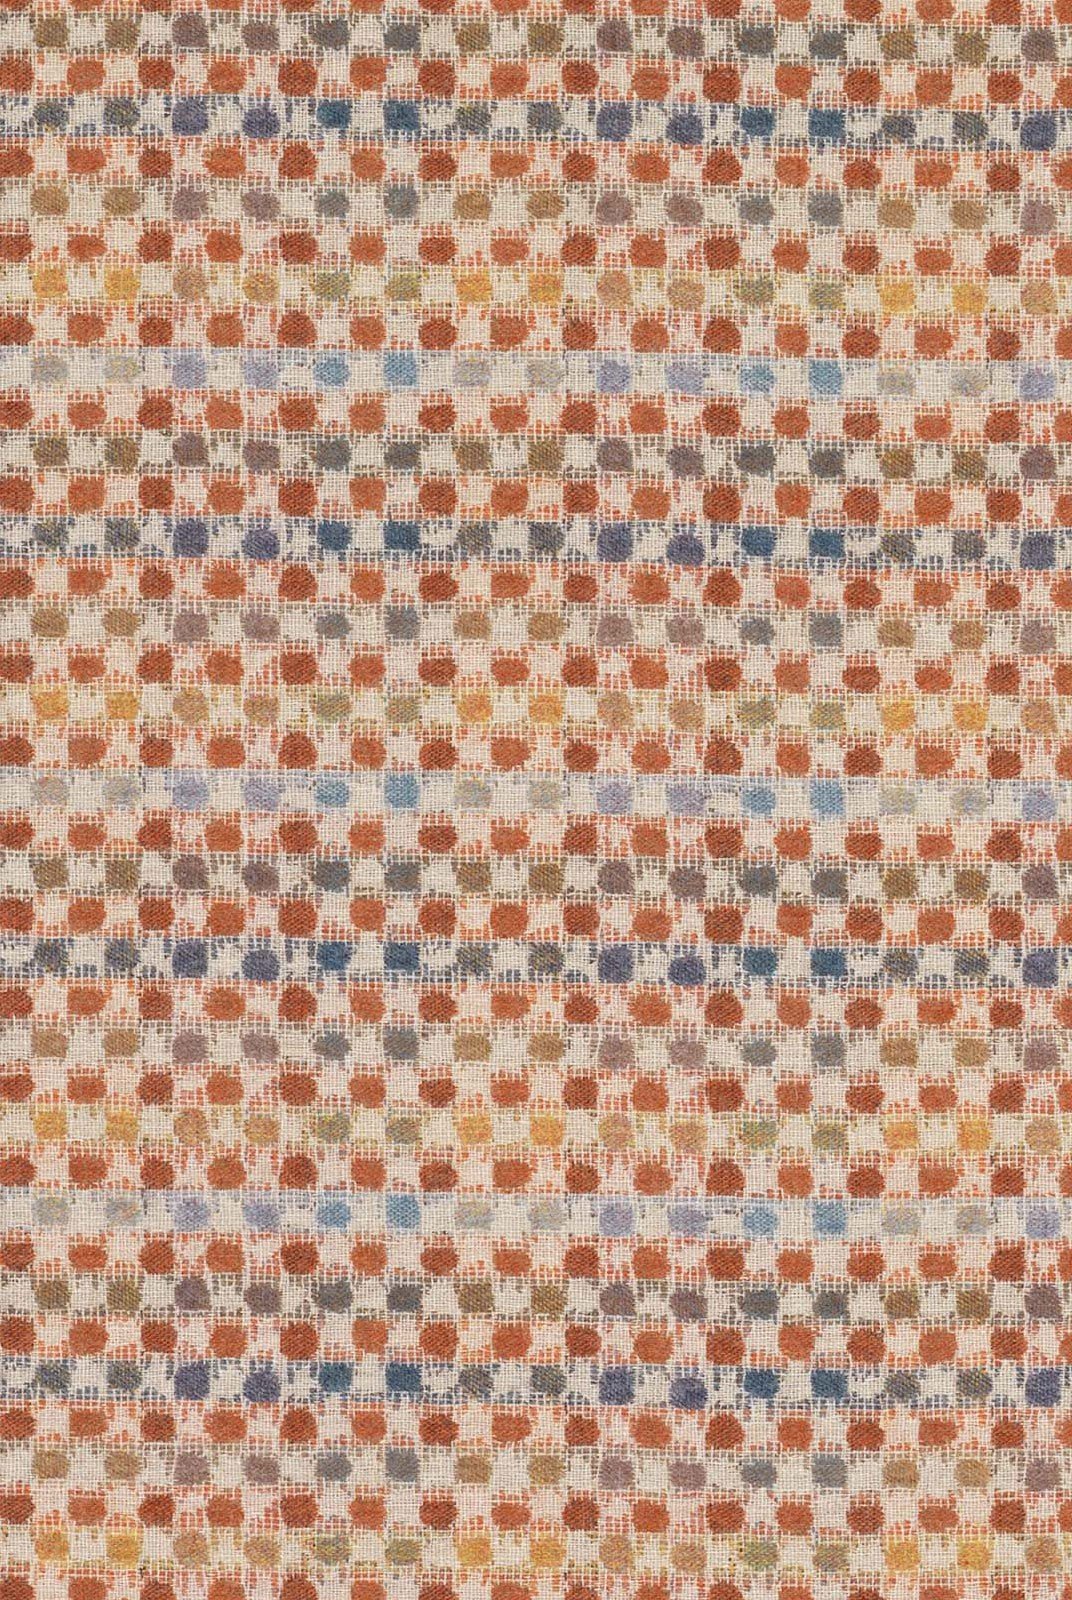 Nina Campbell Fabric - Brodie Weaves Coral/Blue/Gold NCF4140-01